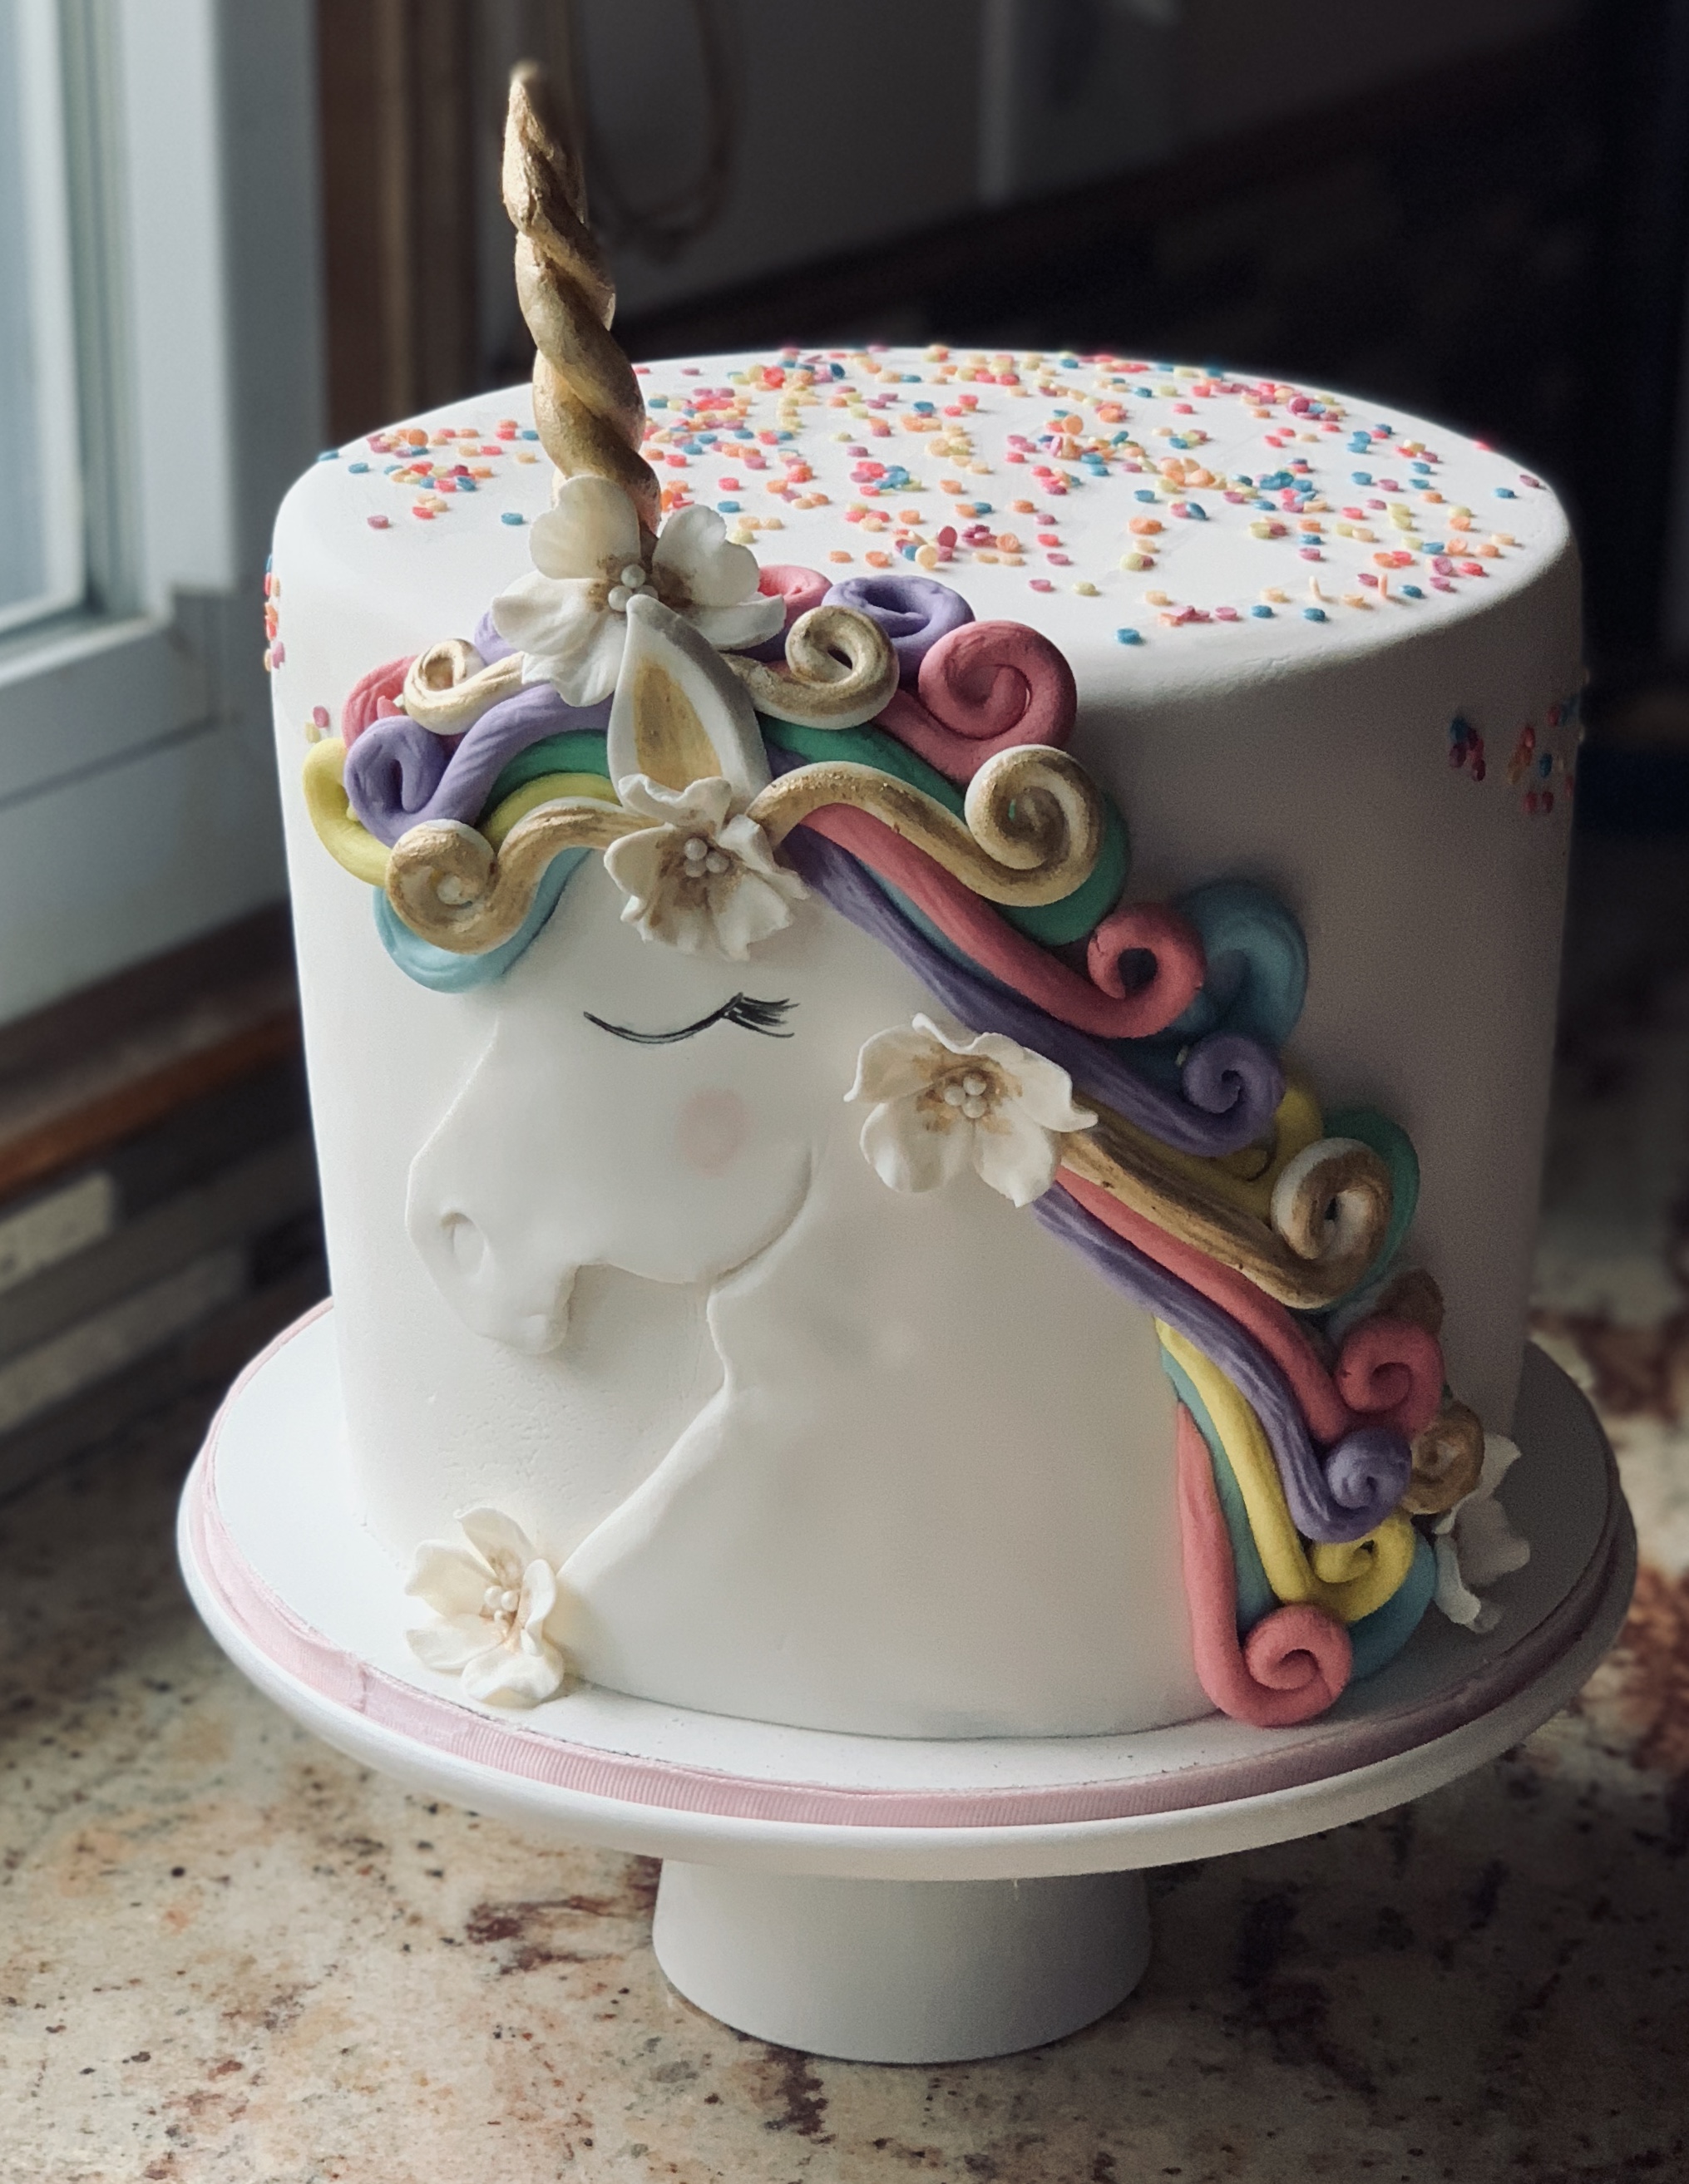 Why Are Custom Cakes So Expensive? — Candid Confections